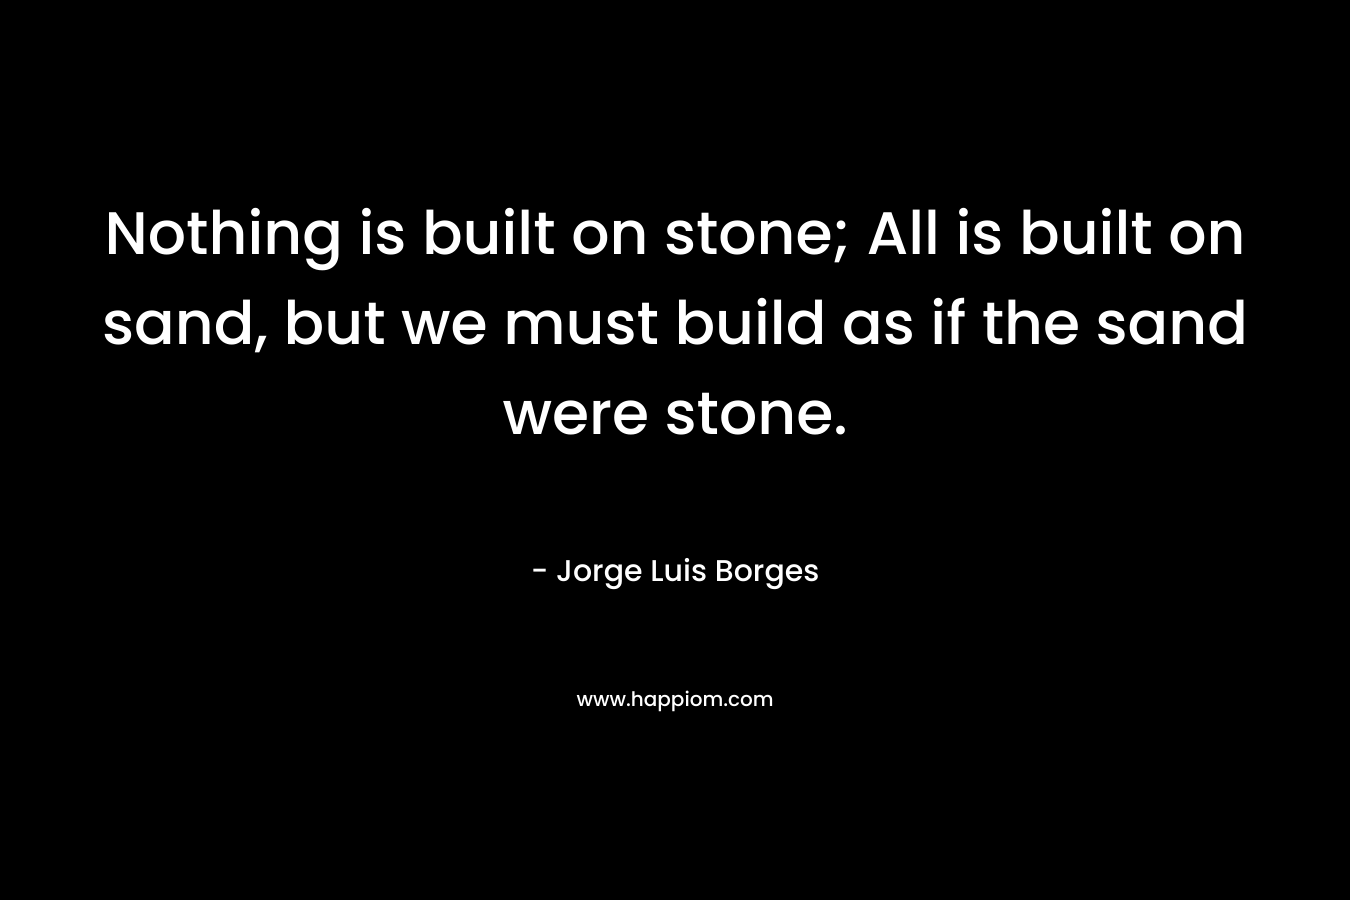 Nothing is built on stone; All is built on sand, but we must build as if the sand were stone.